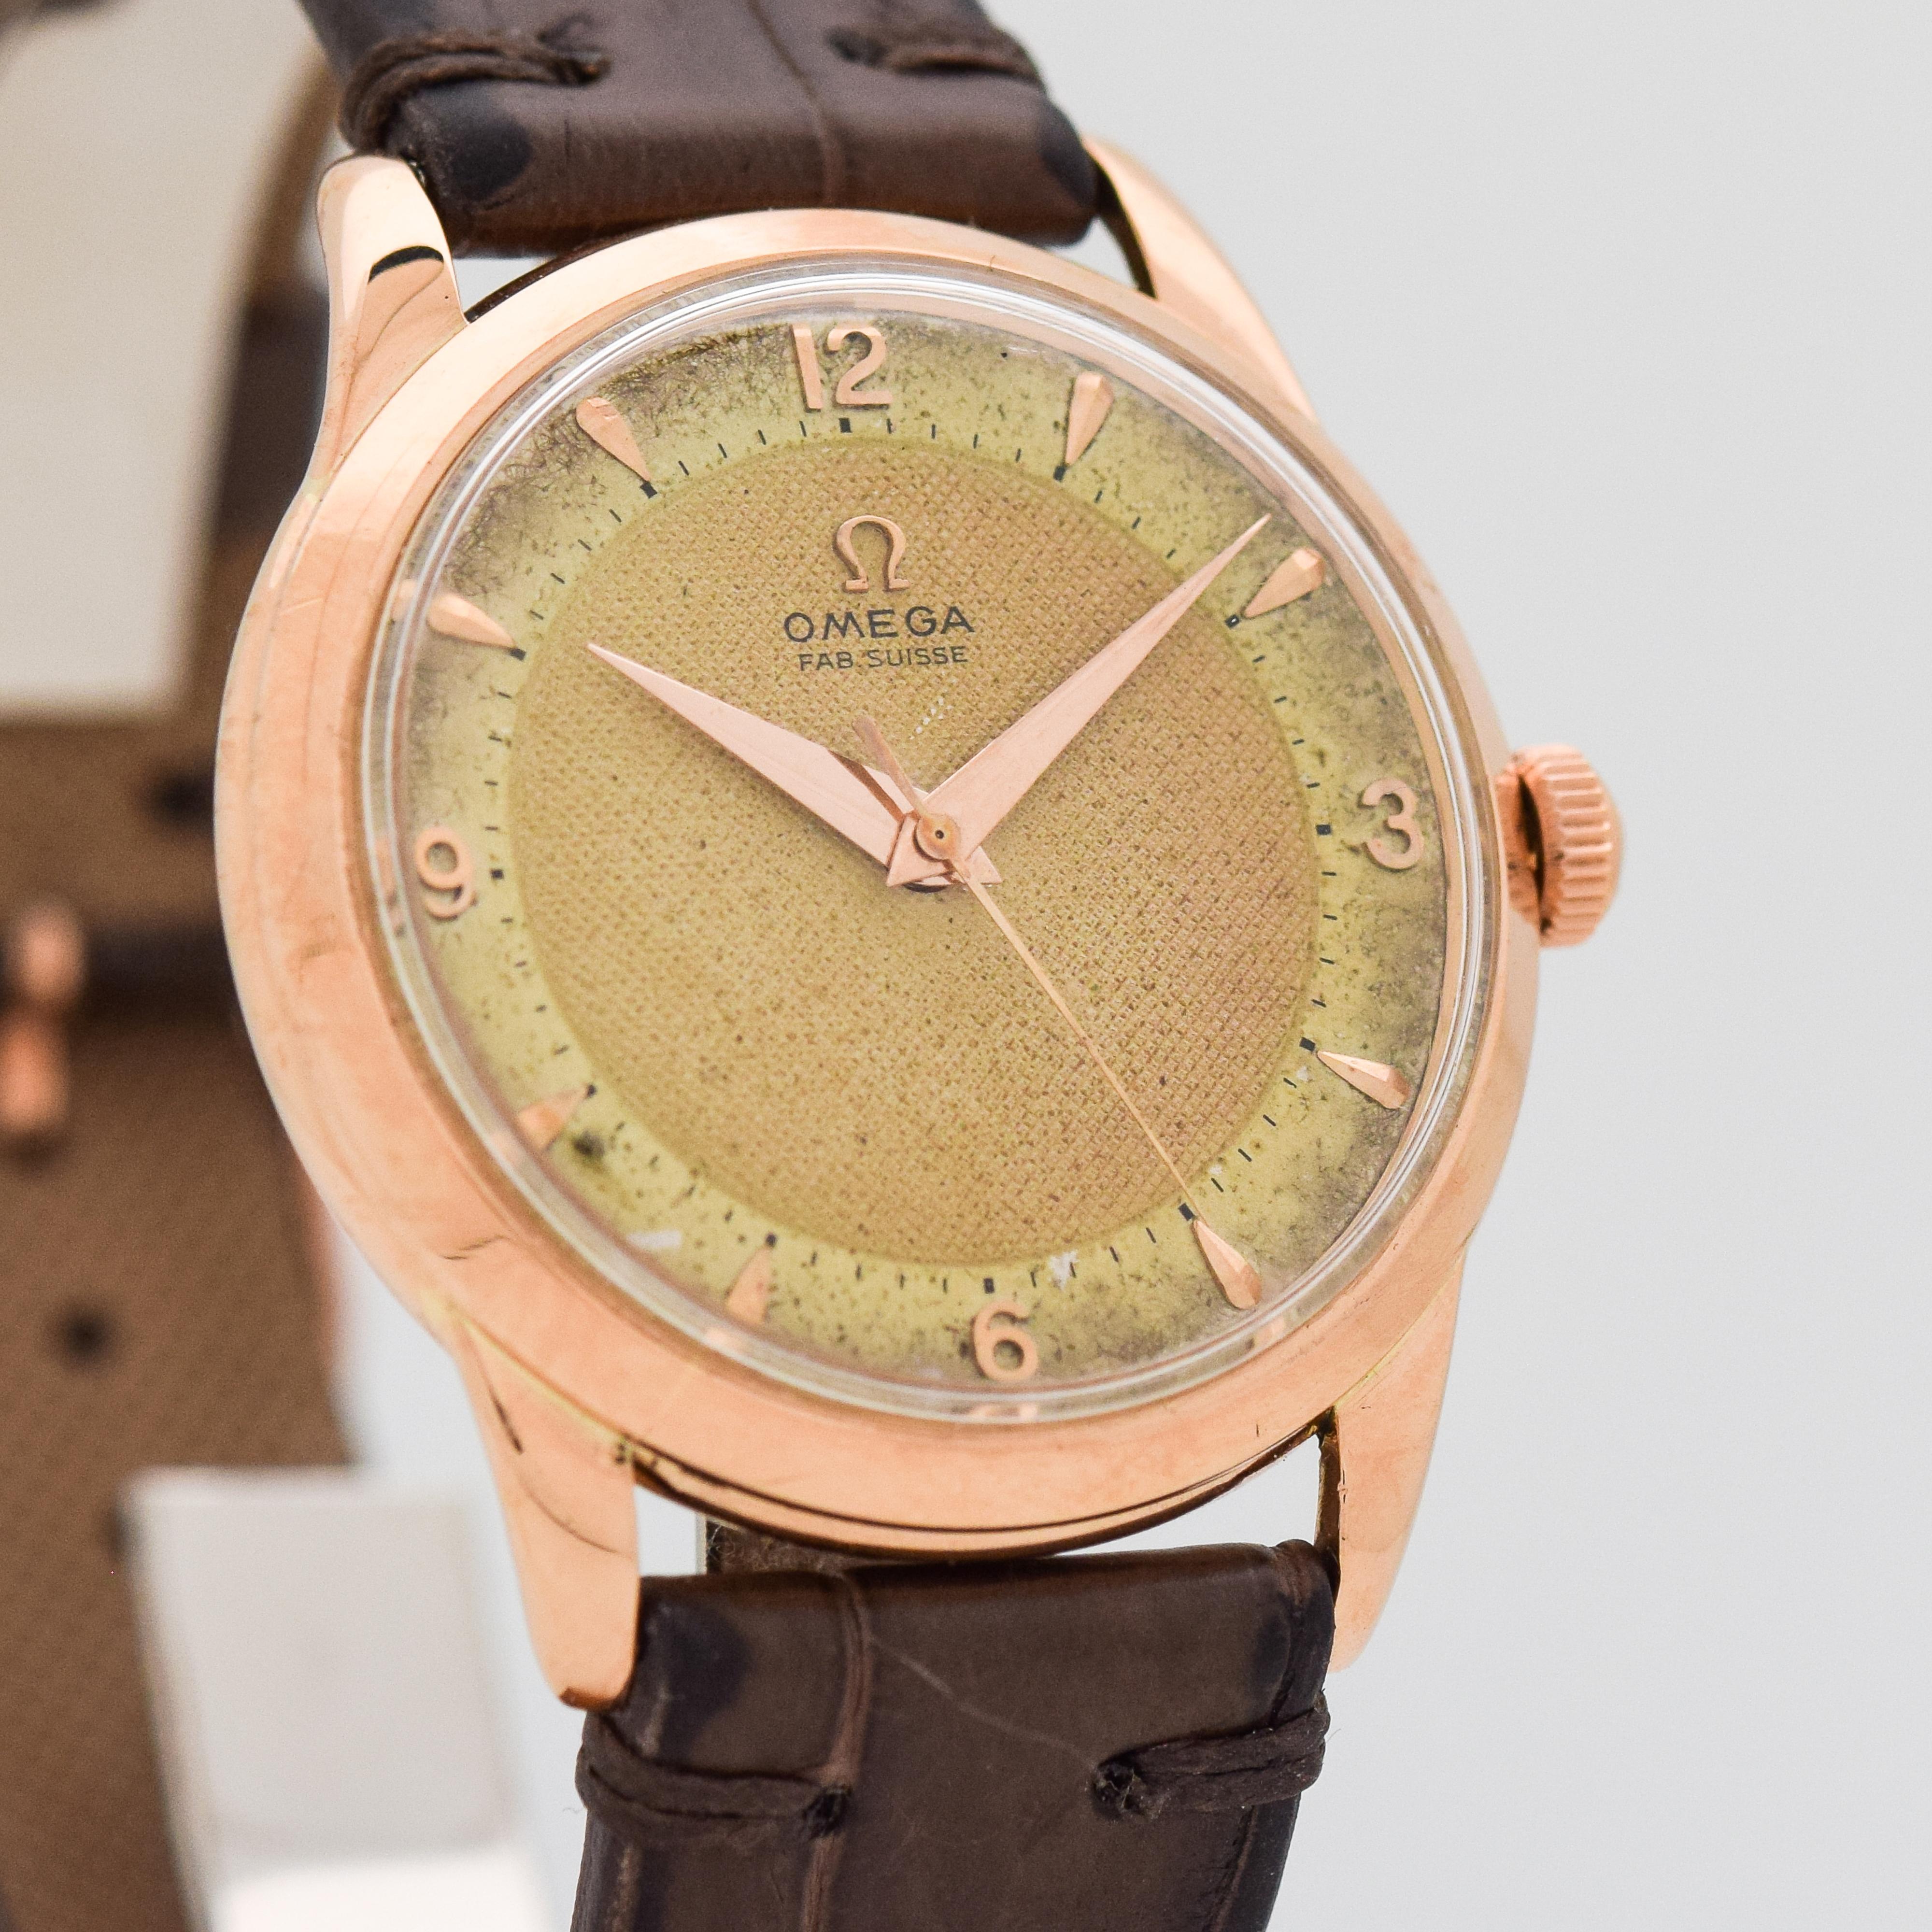 1951 Vintage Omega 18k Rose Gold watch with Original Two Tone Shades of Gold/Champagne Waffle Textured Dial with Applied Rose Gold Arabic 3, 6, 9, 12 and Elongated Beveled Arrow Markers. 36mm x 40mm lug to lug (1.42 in. x 1.57 in.) - 17 jewel,